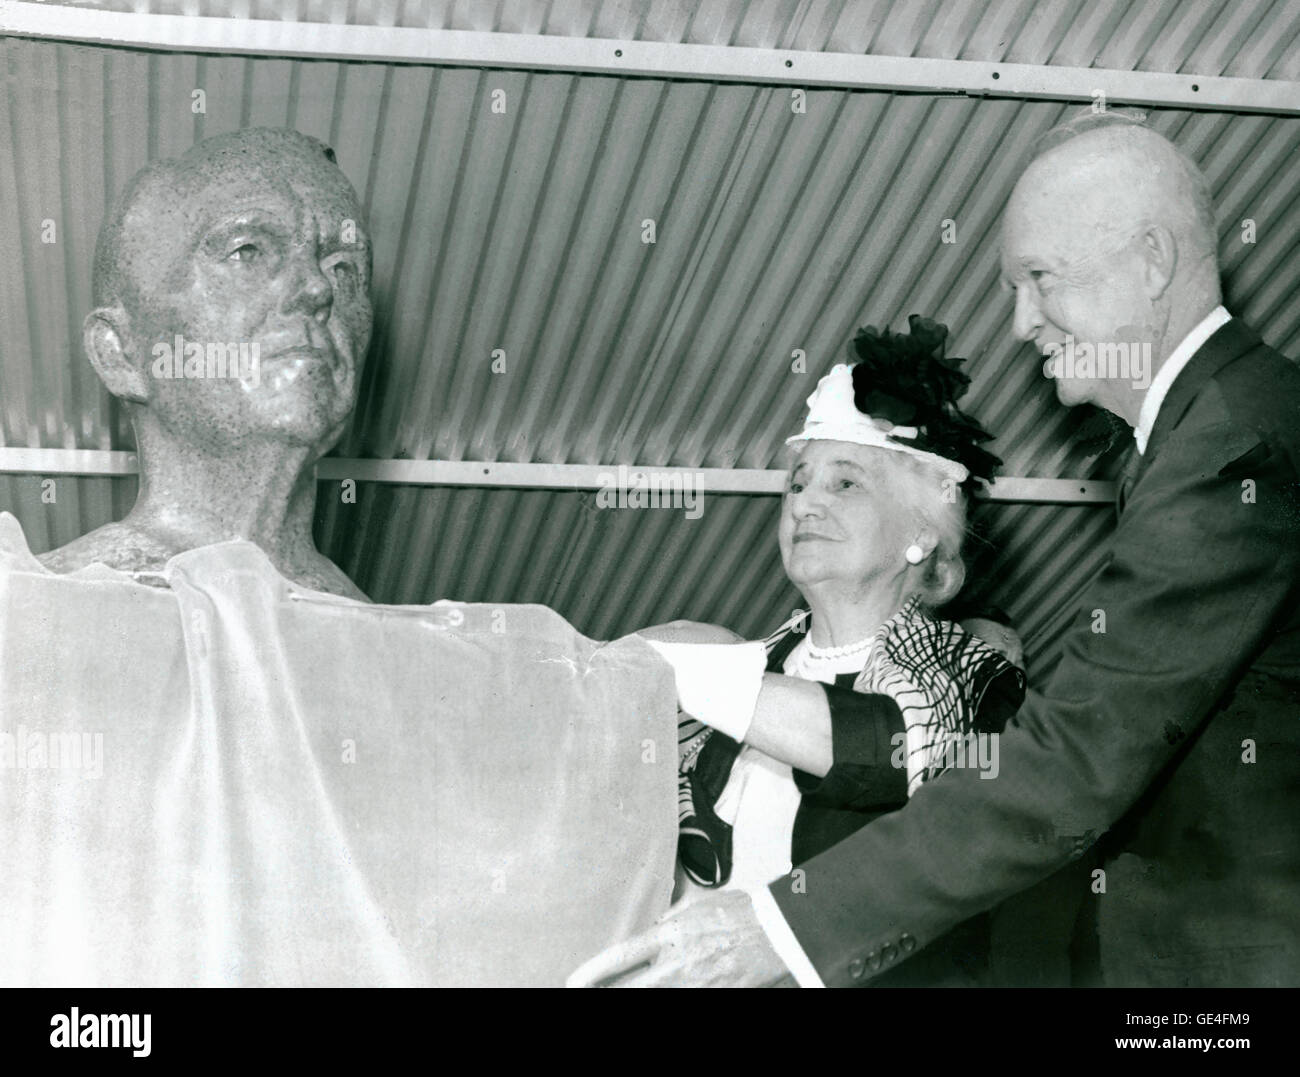 President Dwight D. Eisenhower and Mrs. George C. Marshall unveil the bronze bust of General George C. Marshall during the dedication ceremony of the Marshall Space Flight Center (MSFC) in Huntsville, Alabama, on September 8, 1960. On October 21, 1959, President Eisenhower directed the transfer of personnel from the Redstone Arsenal's Army Ballistic Missile Agency Development Operations Division to the National Aeronautics and Space Administration (NASA). A new field installation of NASA was designated as George C. Marshall Space Flight Center (MSFC), and its complex was formed within the boun Stock Photo